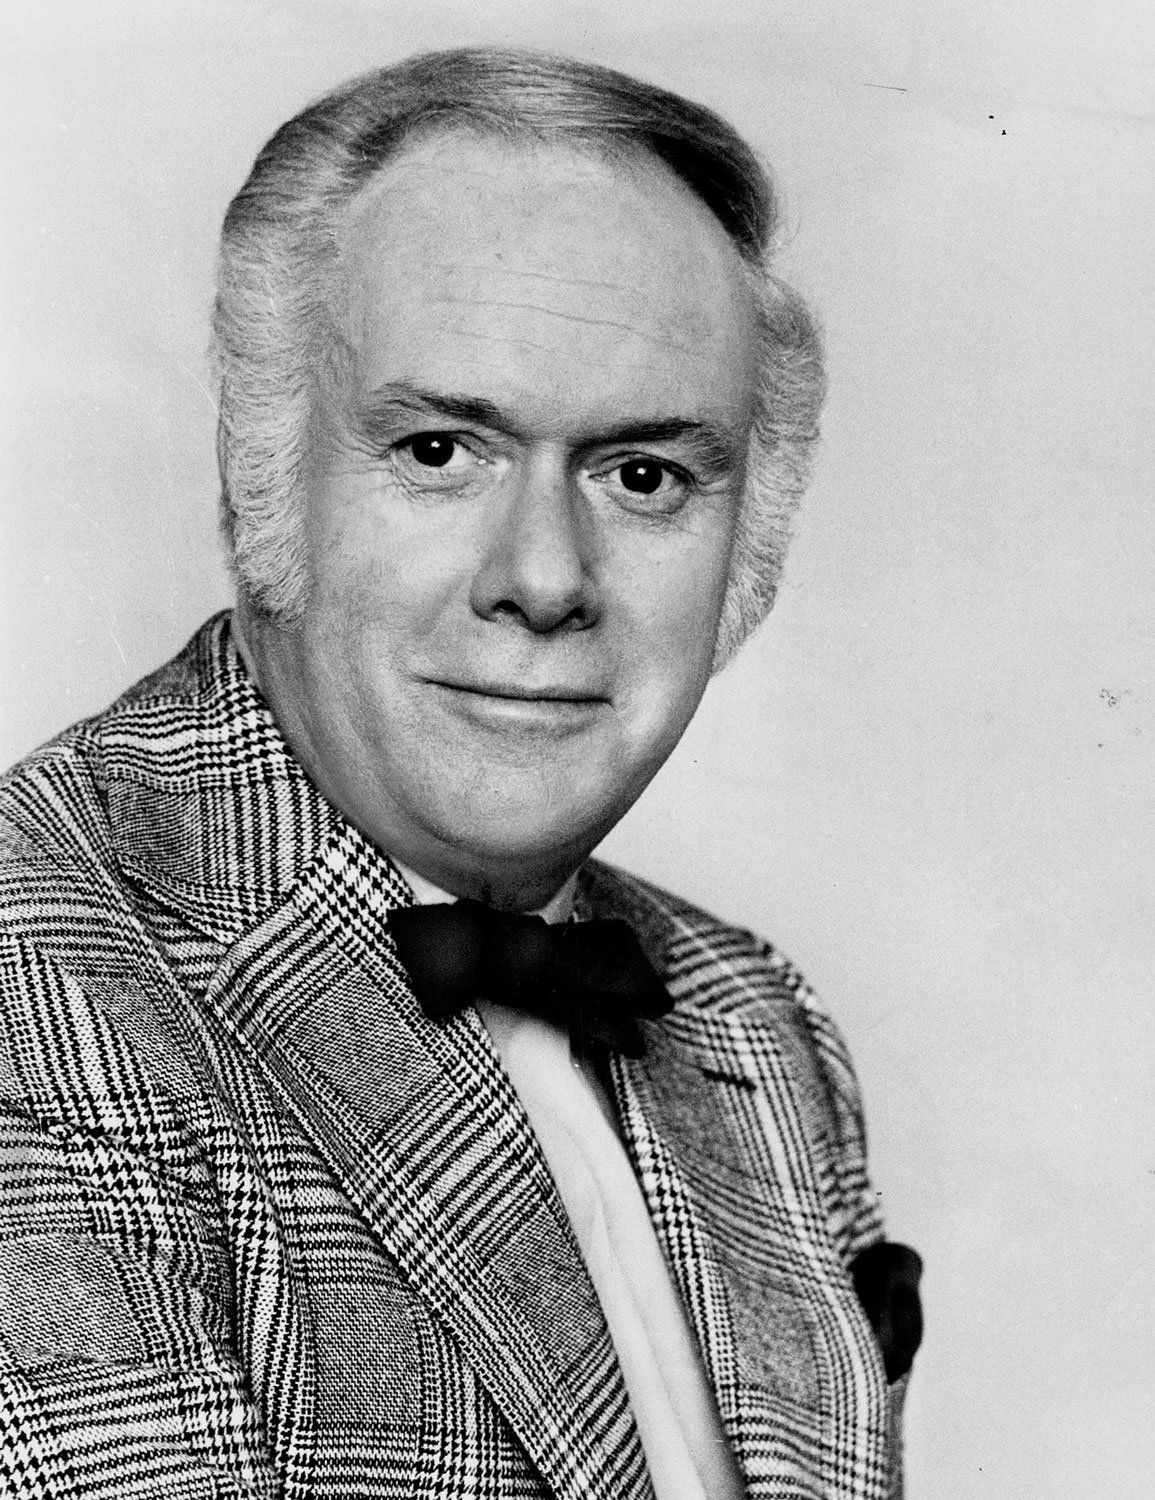 Canadian historian and journalist Pierre Berton. On New Years Eve, 1959, Berton toured the Huronia Regional Centre and penned an exposé describing the atrocious living conditions he found at the institution. Berton is an older white man with a receding hairline. He is wearing a plaid blazer and a black bowtie. Image from the Toronto Star Archives.